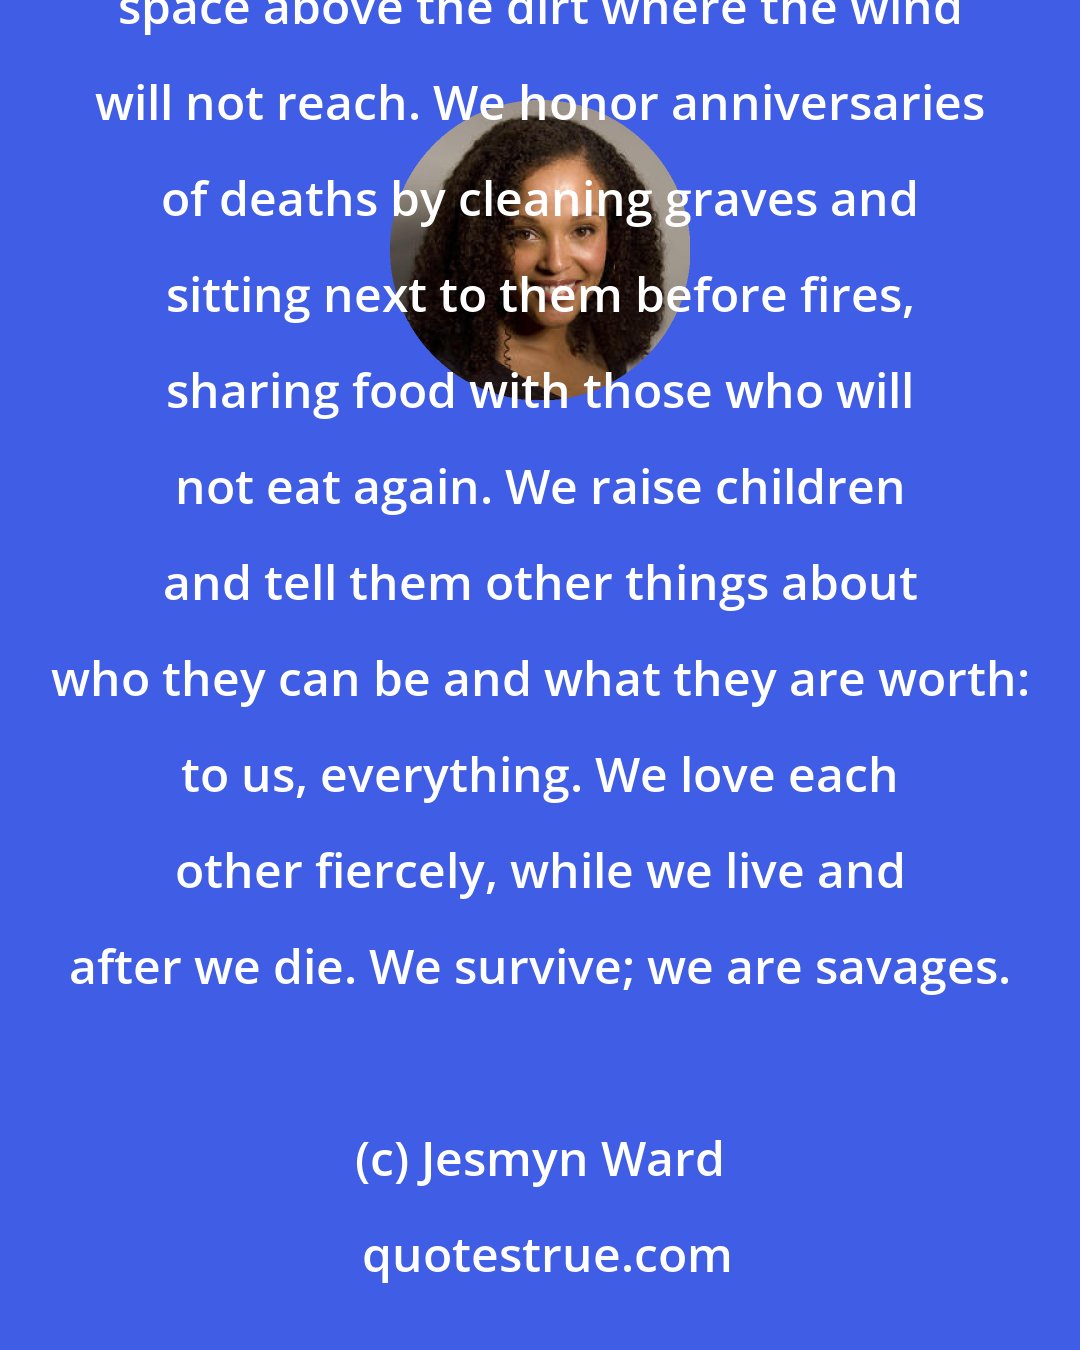 Jesmyn Ward: Life is a hurricane, and we board up to save what we can and bow low to the earth to crouch in that small space above the dirt where the wind will not reach. We honor anniversaries of deaths by cleaning graves and sitting next to them before fires, sharing food with those who will not eat again. We raise children and tell them other things about who they can be and what they are worth: to us, everything. We love each other fiercely, while we live and after we die. We survive; we are savages.